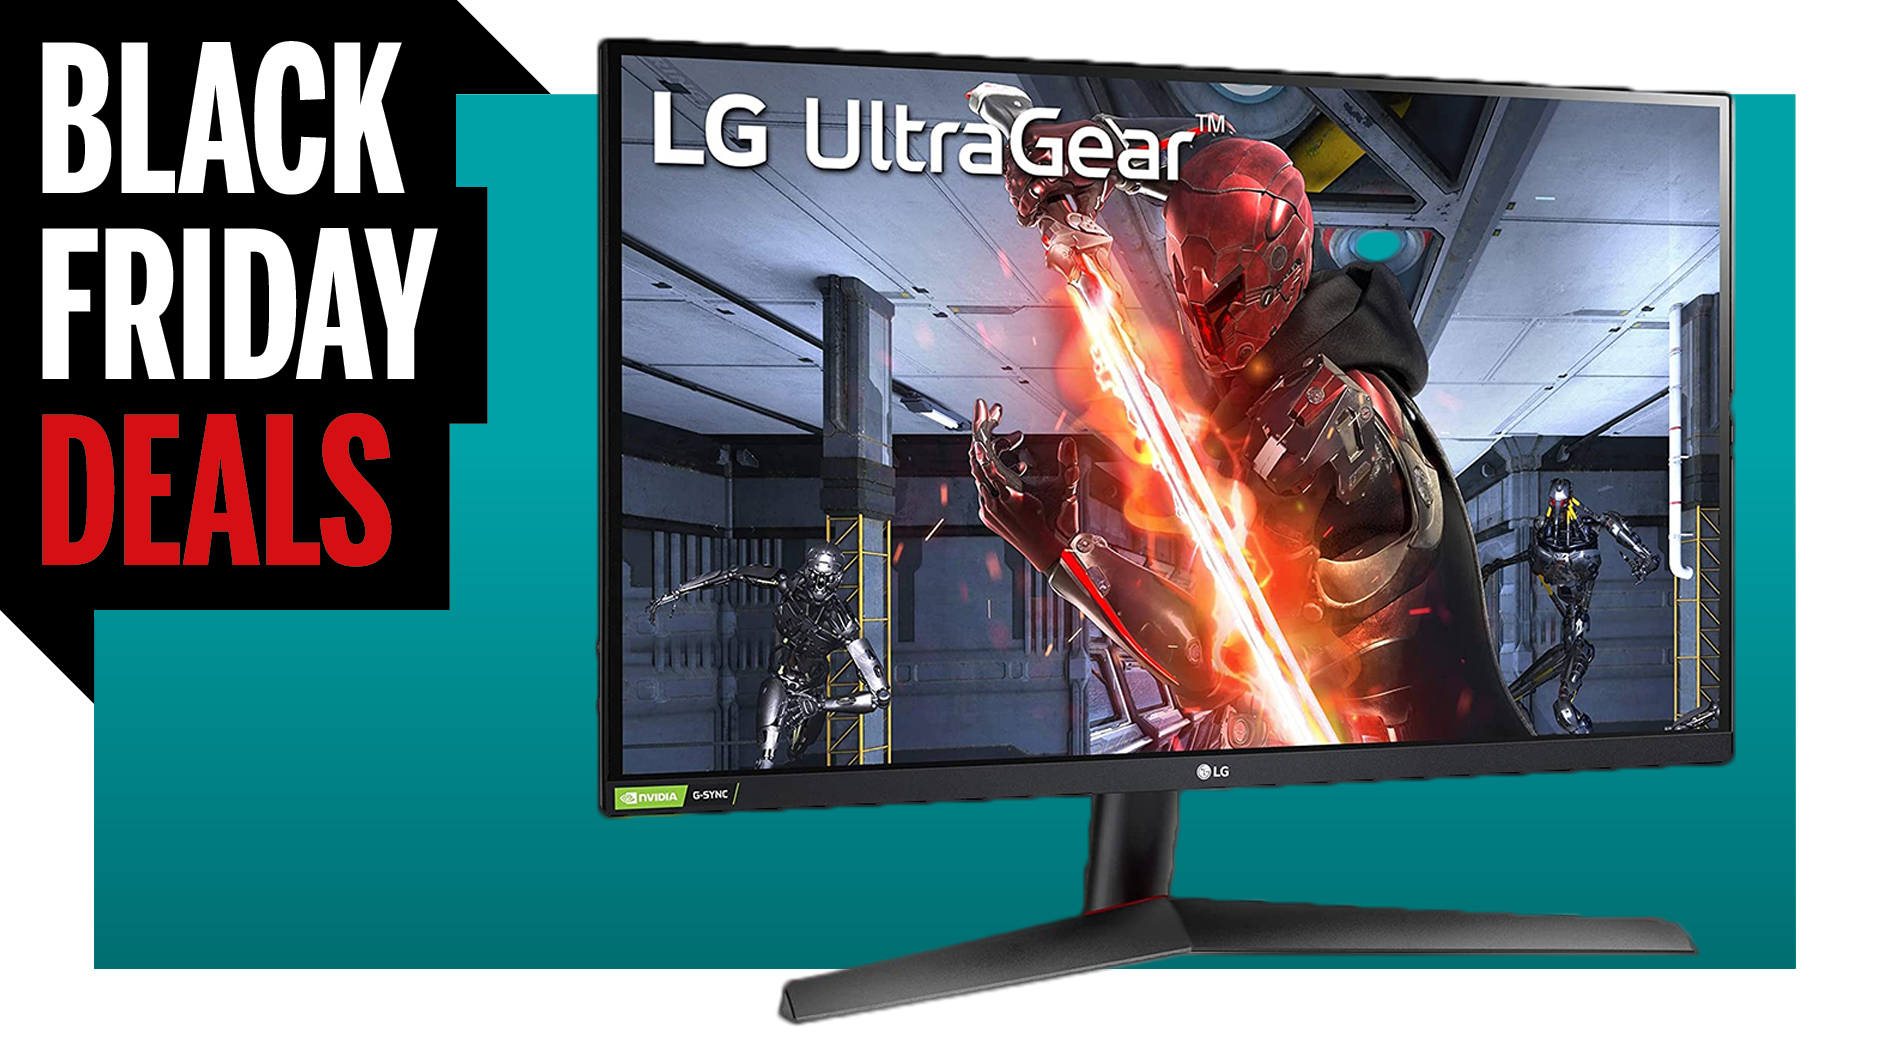  LG's 144Hz gaming monitor deal is your ticket to high refresh rate bliss 